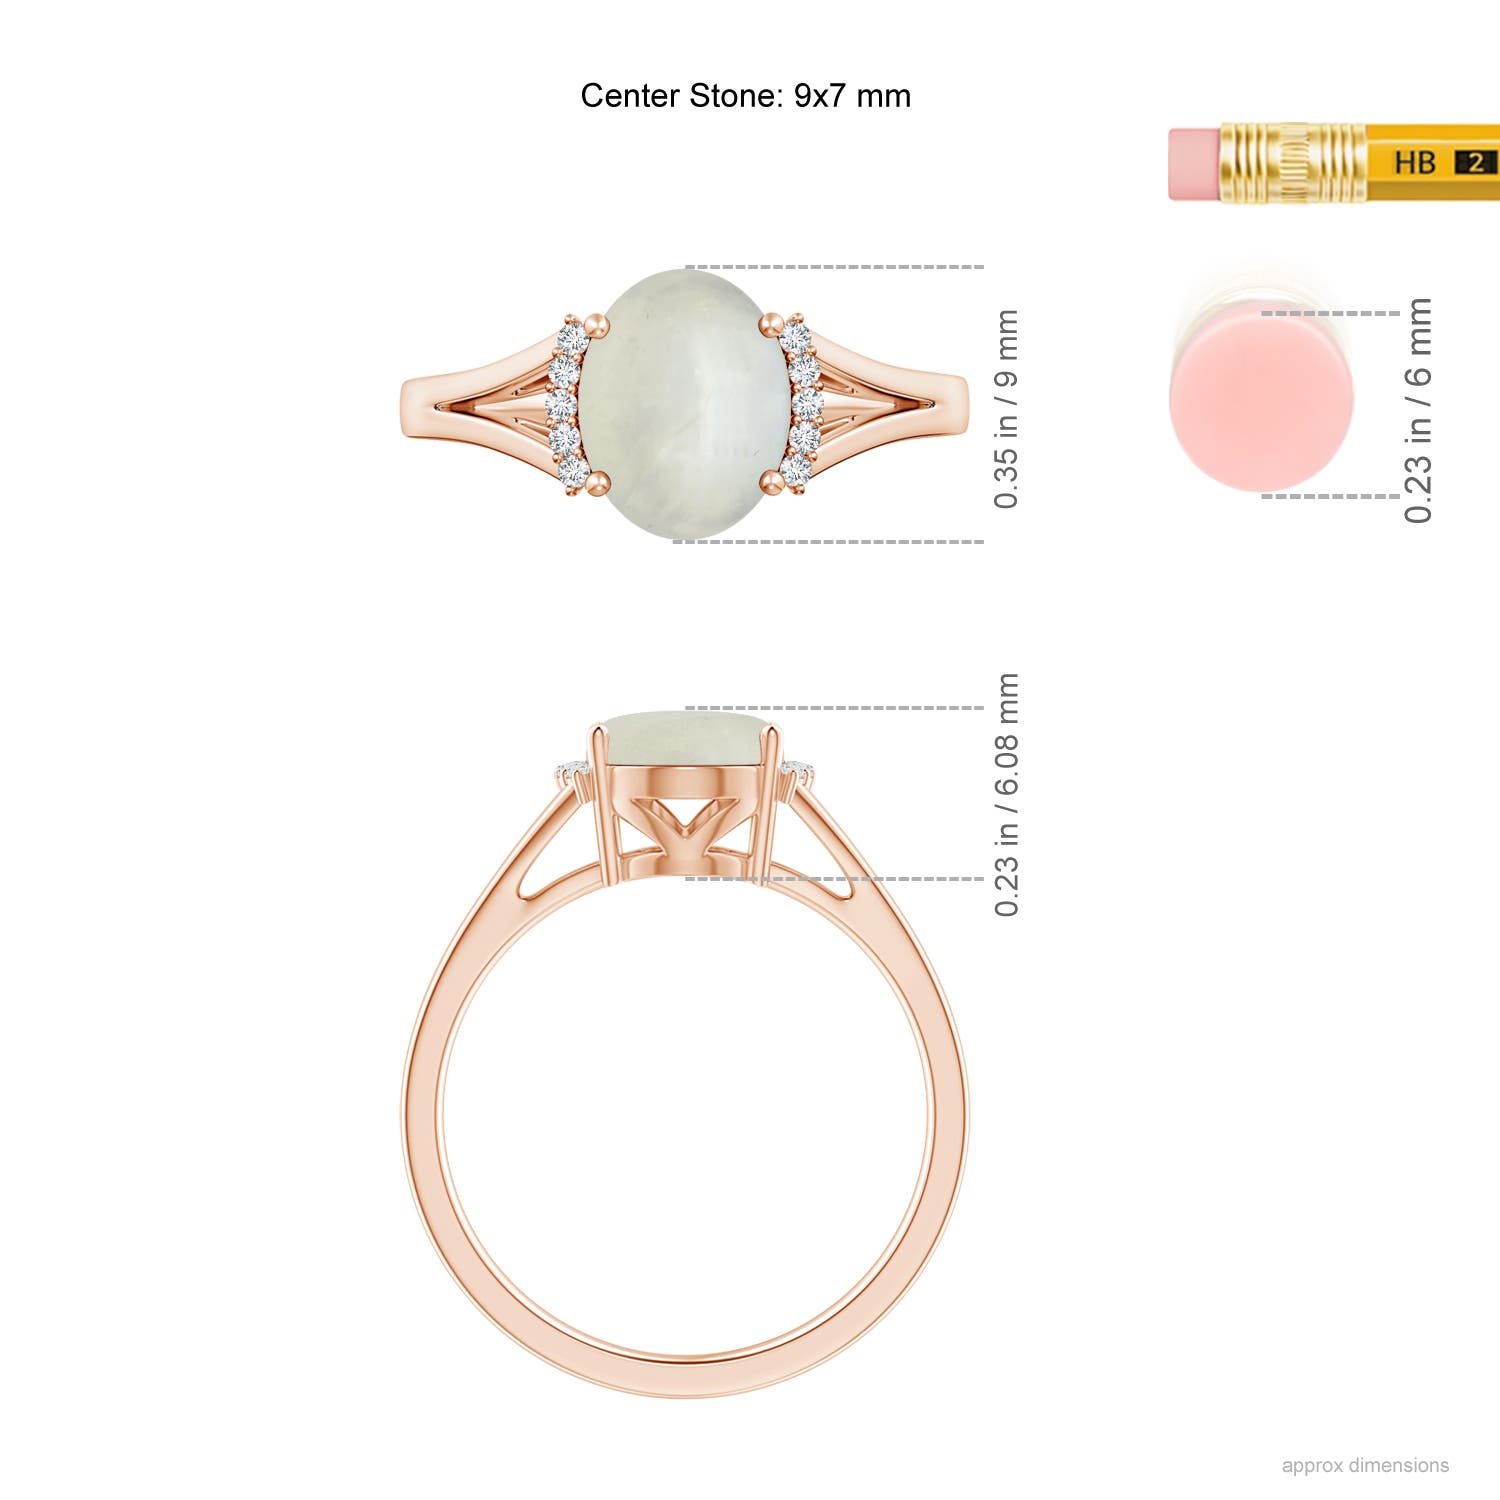 AA - Moonstone / 1.77 CT / 14 KT Rose Gold